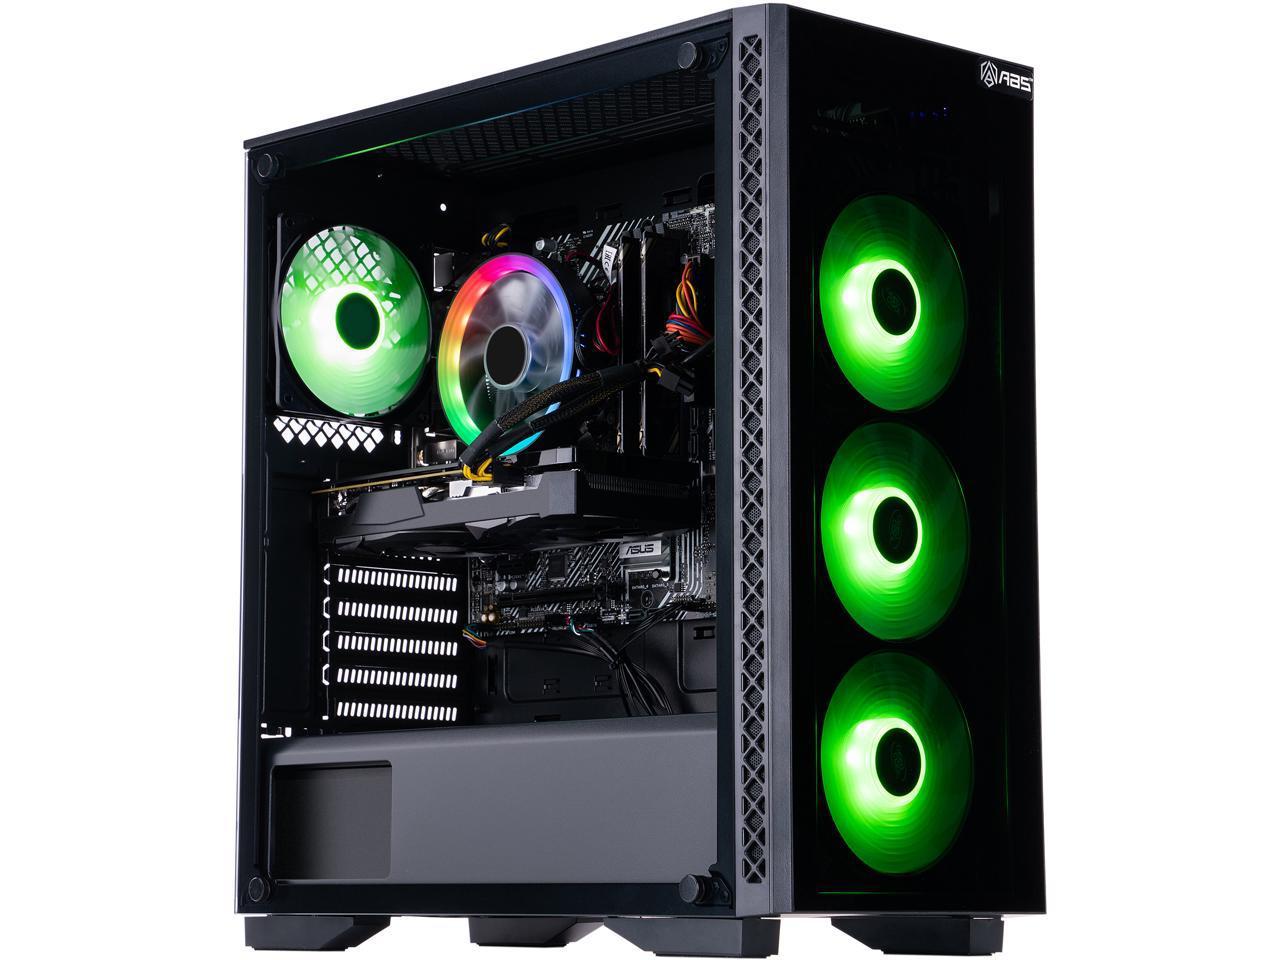 How to Record Gameplay on CyberPowerPC Gaming Desktop?